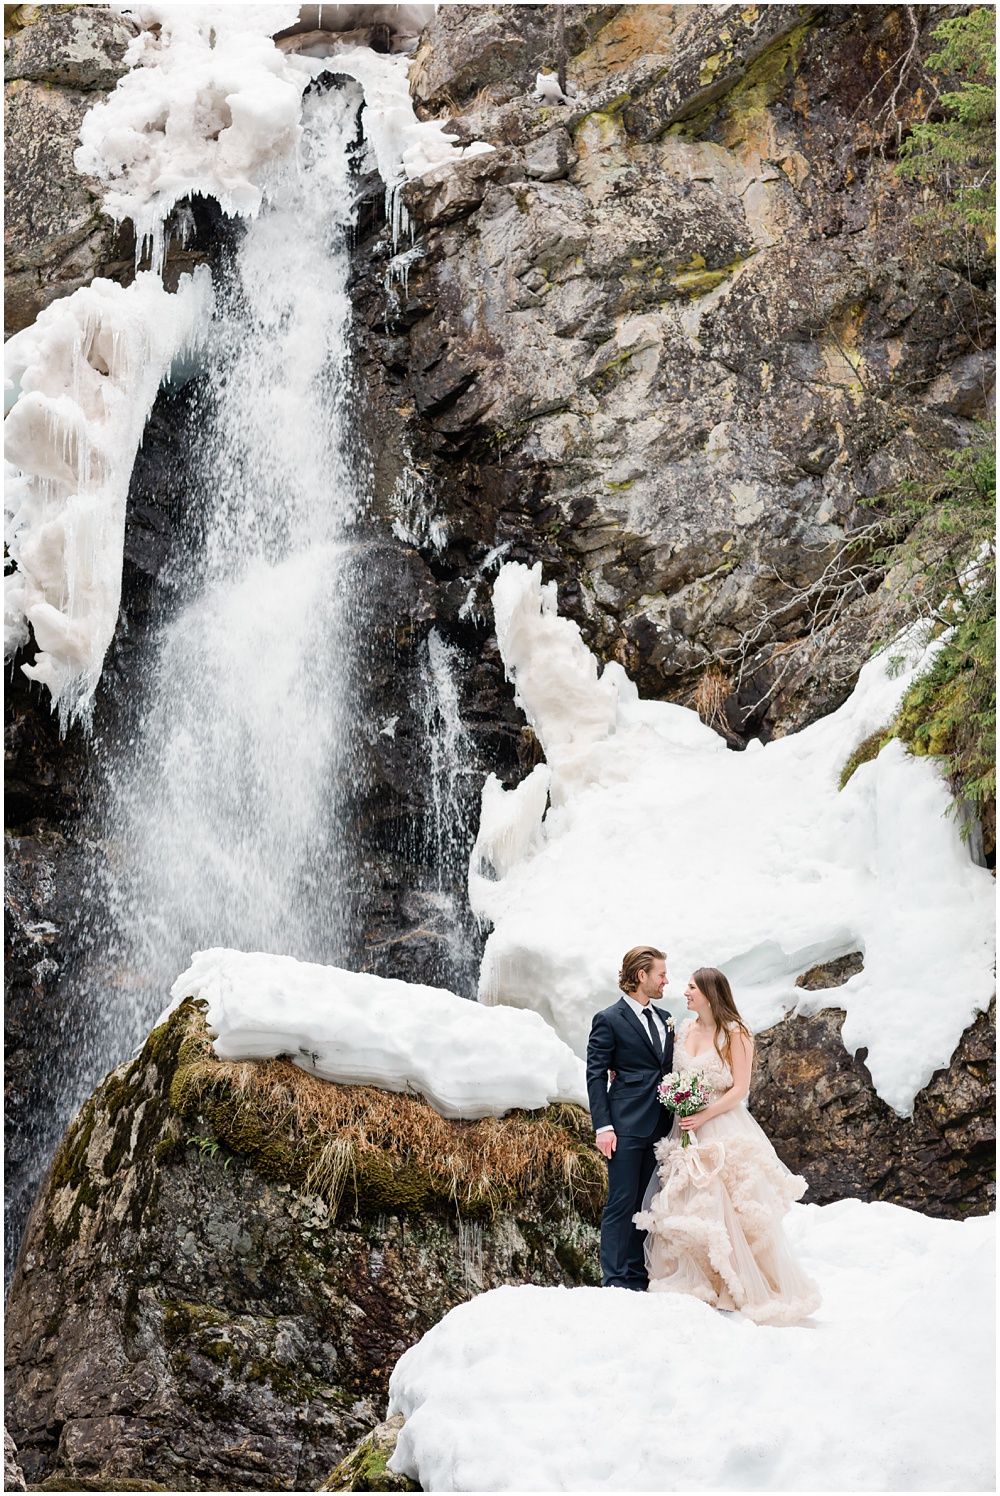 Bride and groom by waterfall